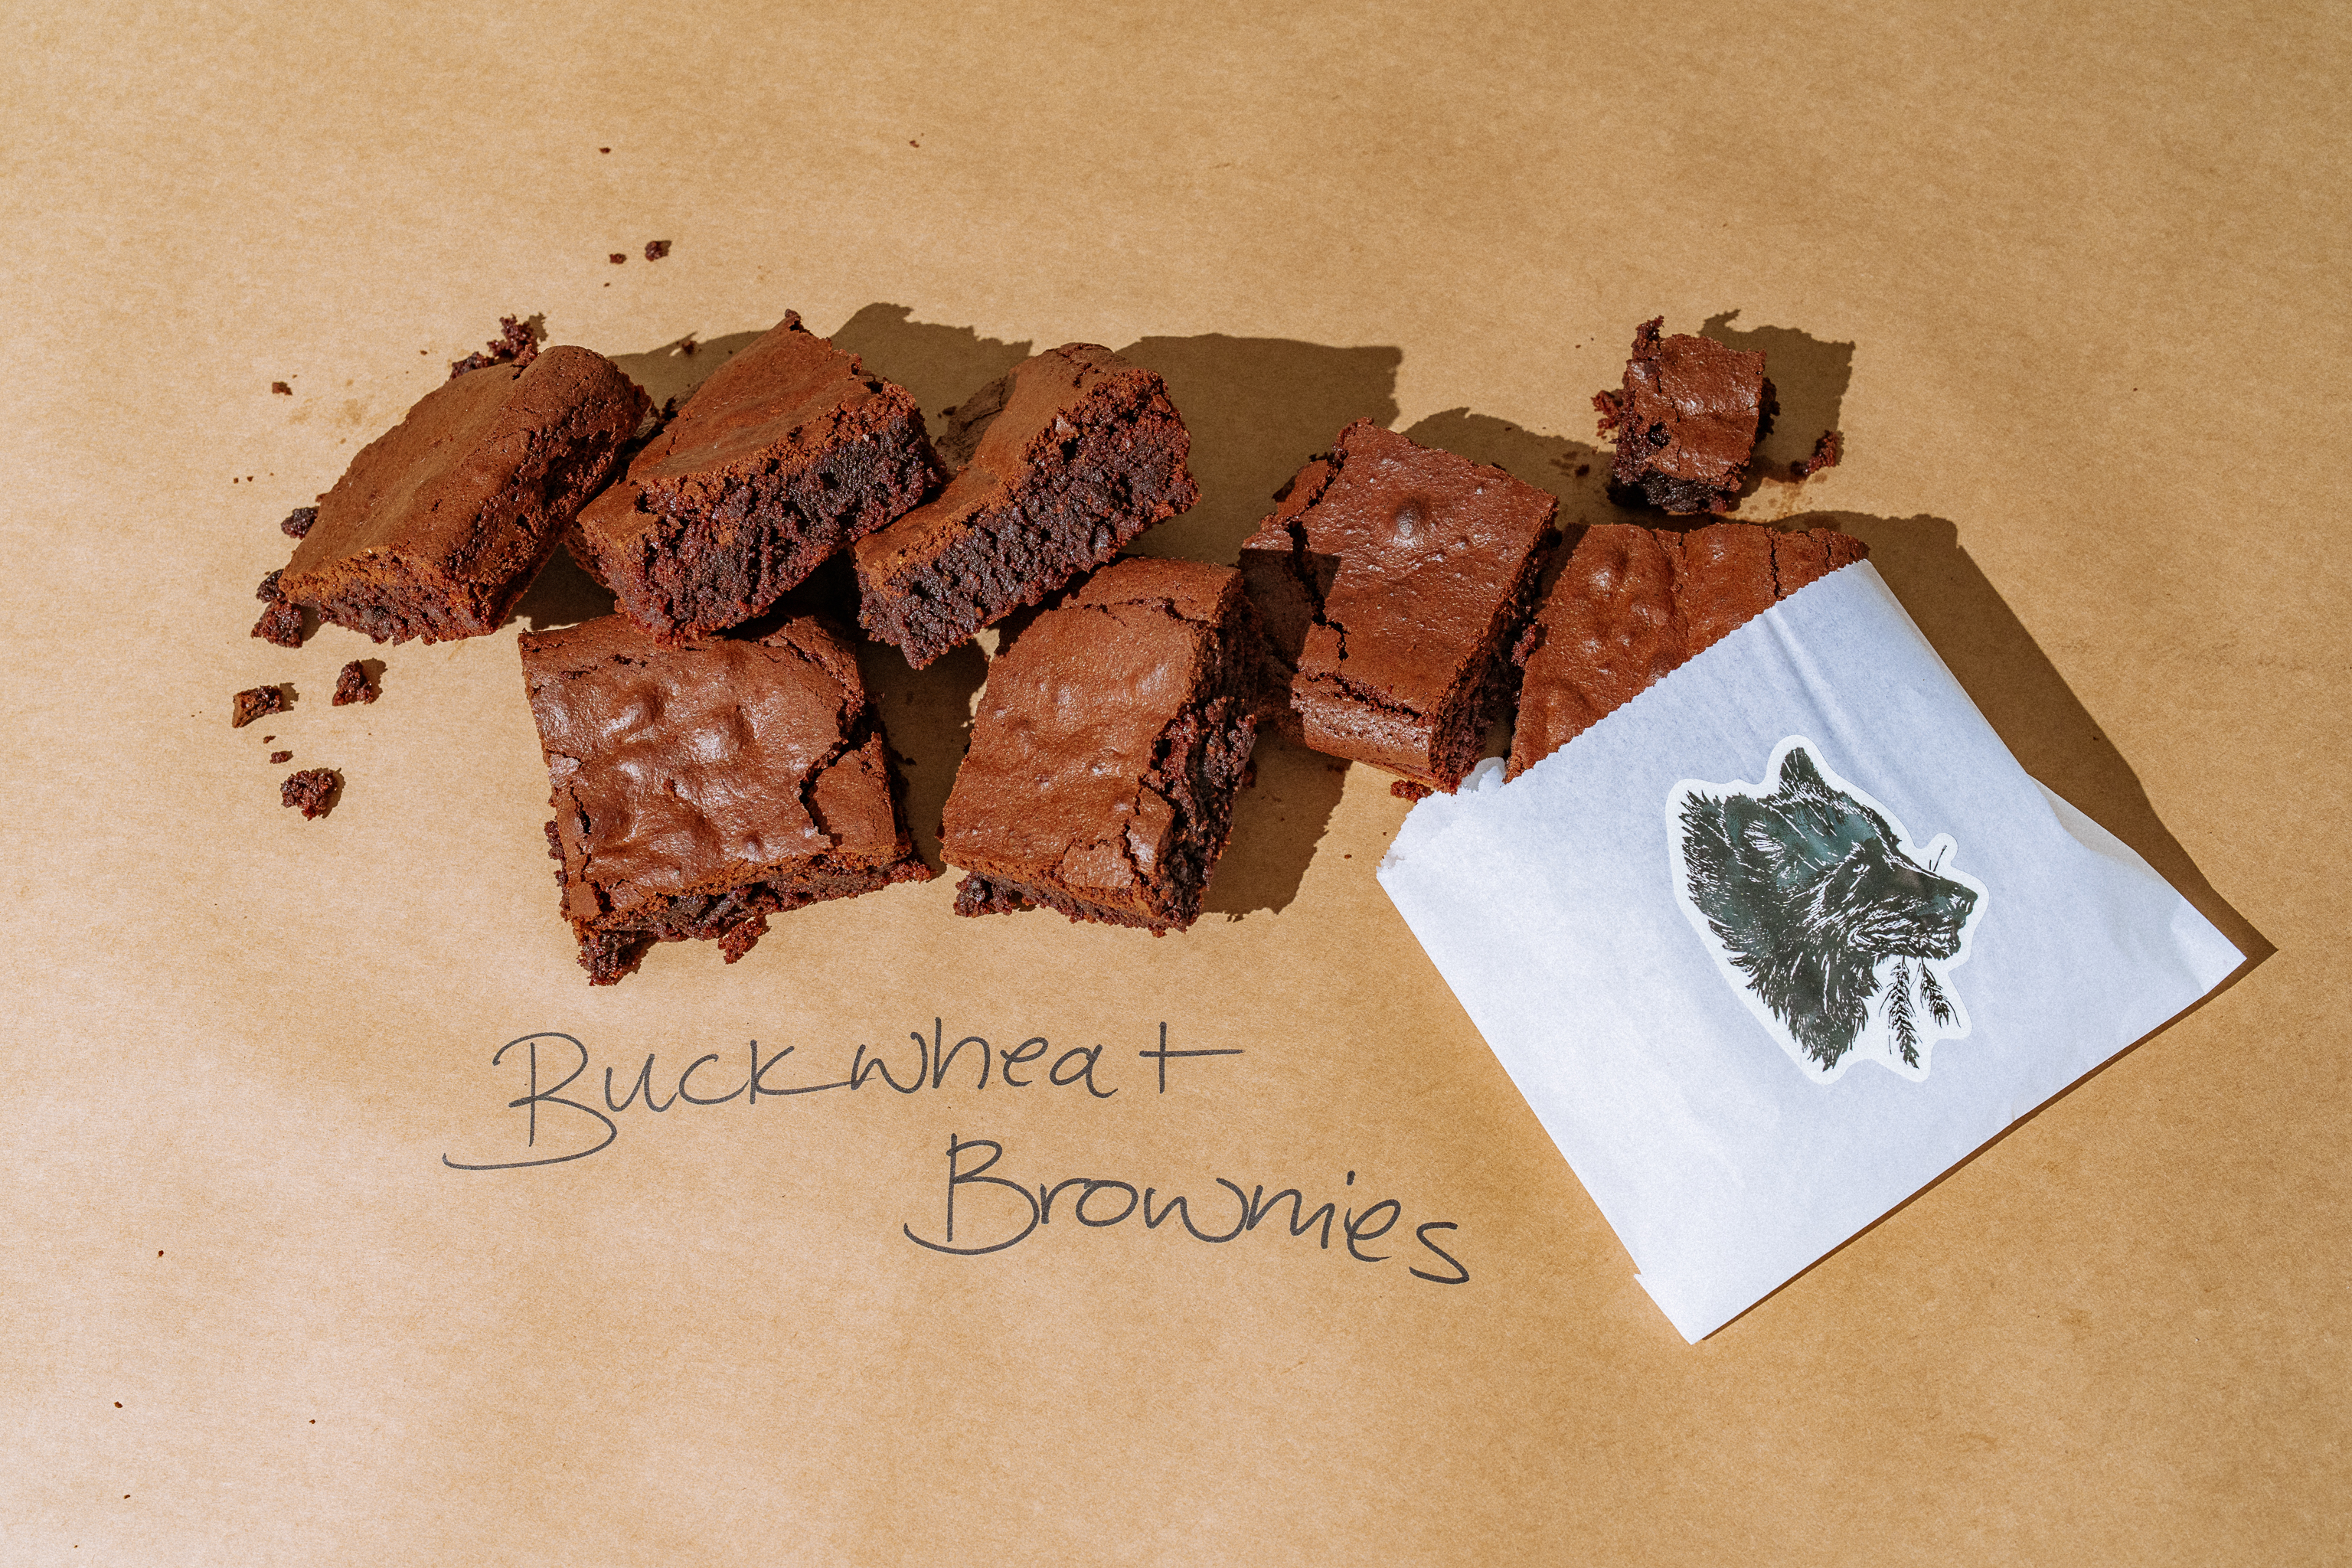 Brownies on butcher paper next to a sticker of a wolf and the words Buckwheat Brownies on the paper.